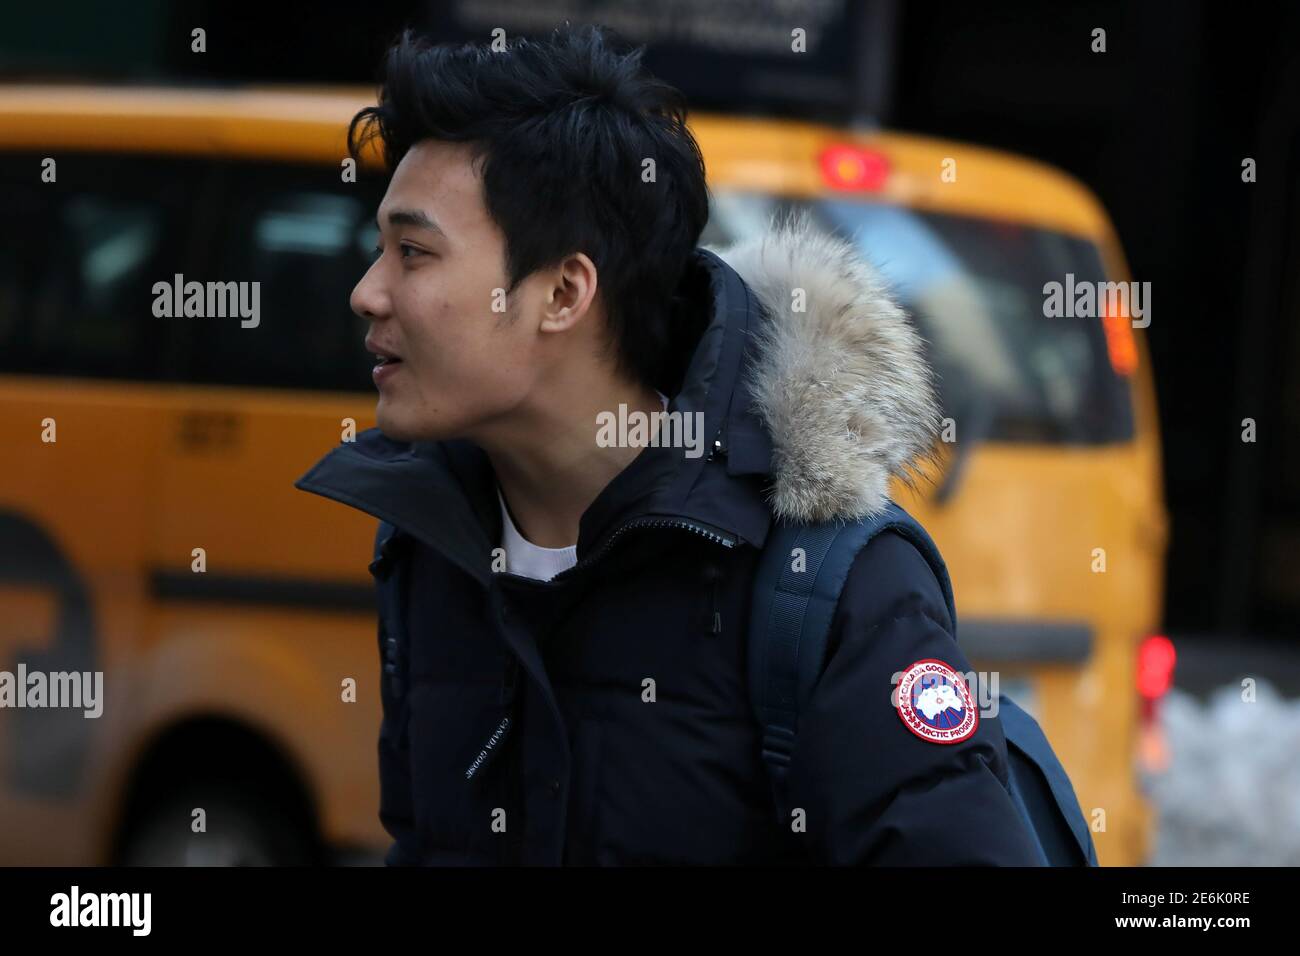 A man wears a Canada Goose jacket at Times Square in New York, U.S., March  16, 2017. REUTERS/Shannon Stapleton Stock Photo - Alamy